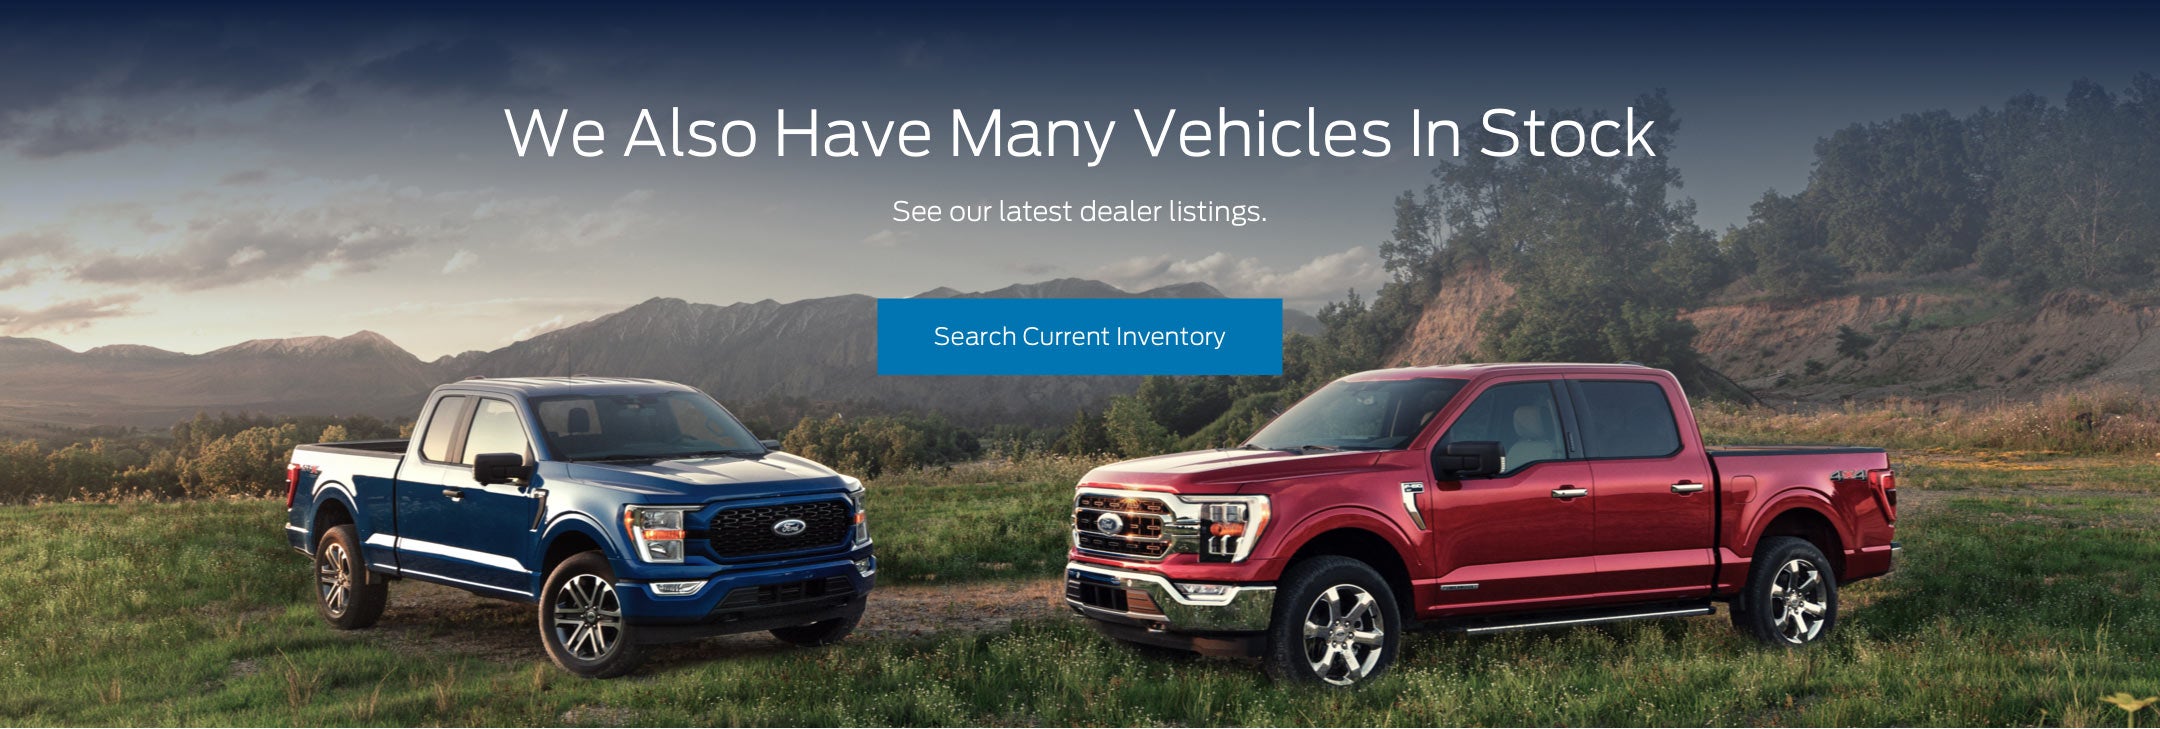 Ford vehicles in stock | Marshall Ford in Carrollton KY